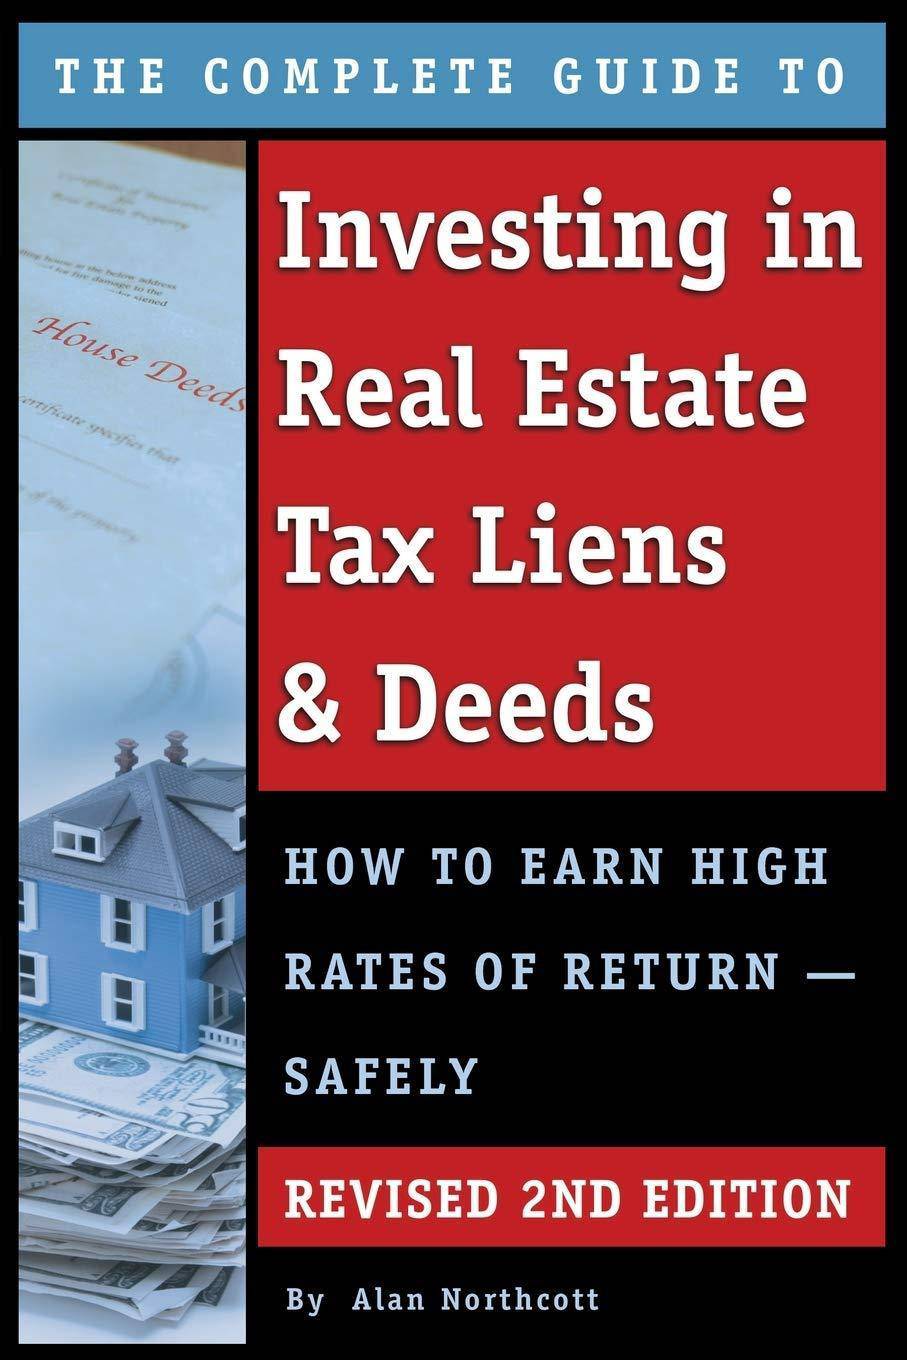 The Complete Guide to Investing in Real Estate Tax Liens & Deeds - SureShot Books Publishing LLC